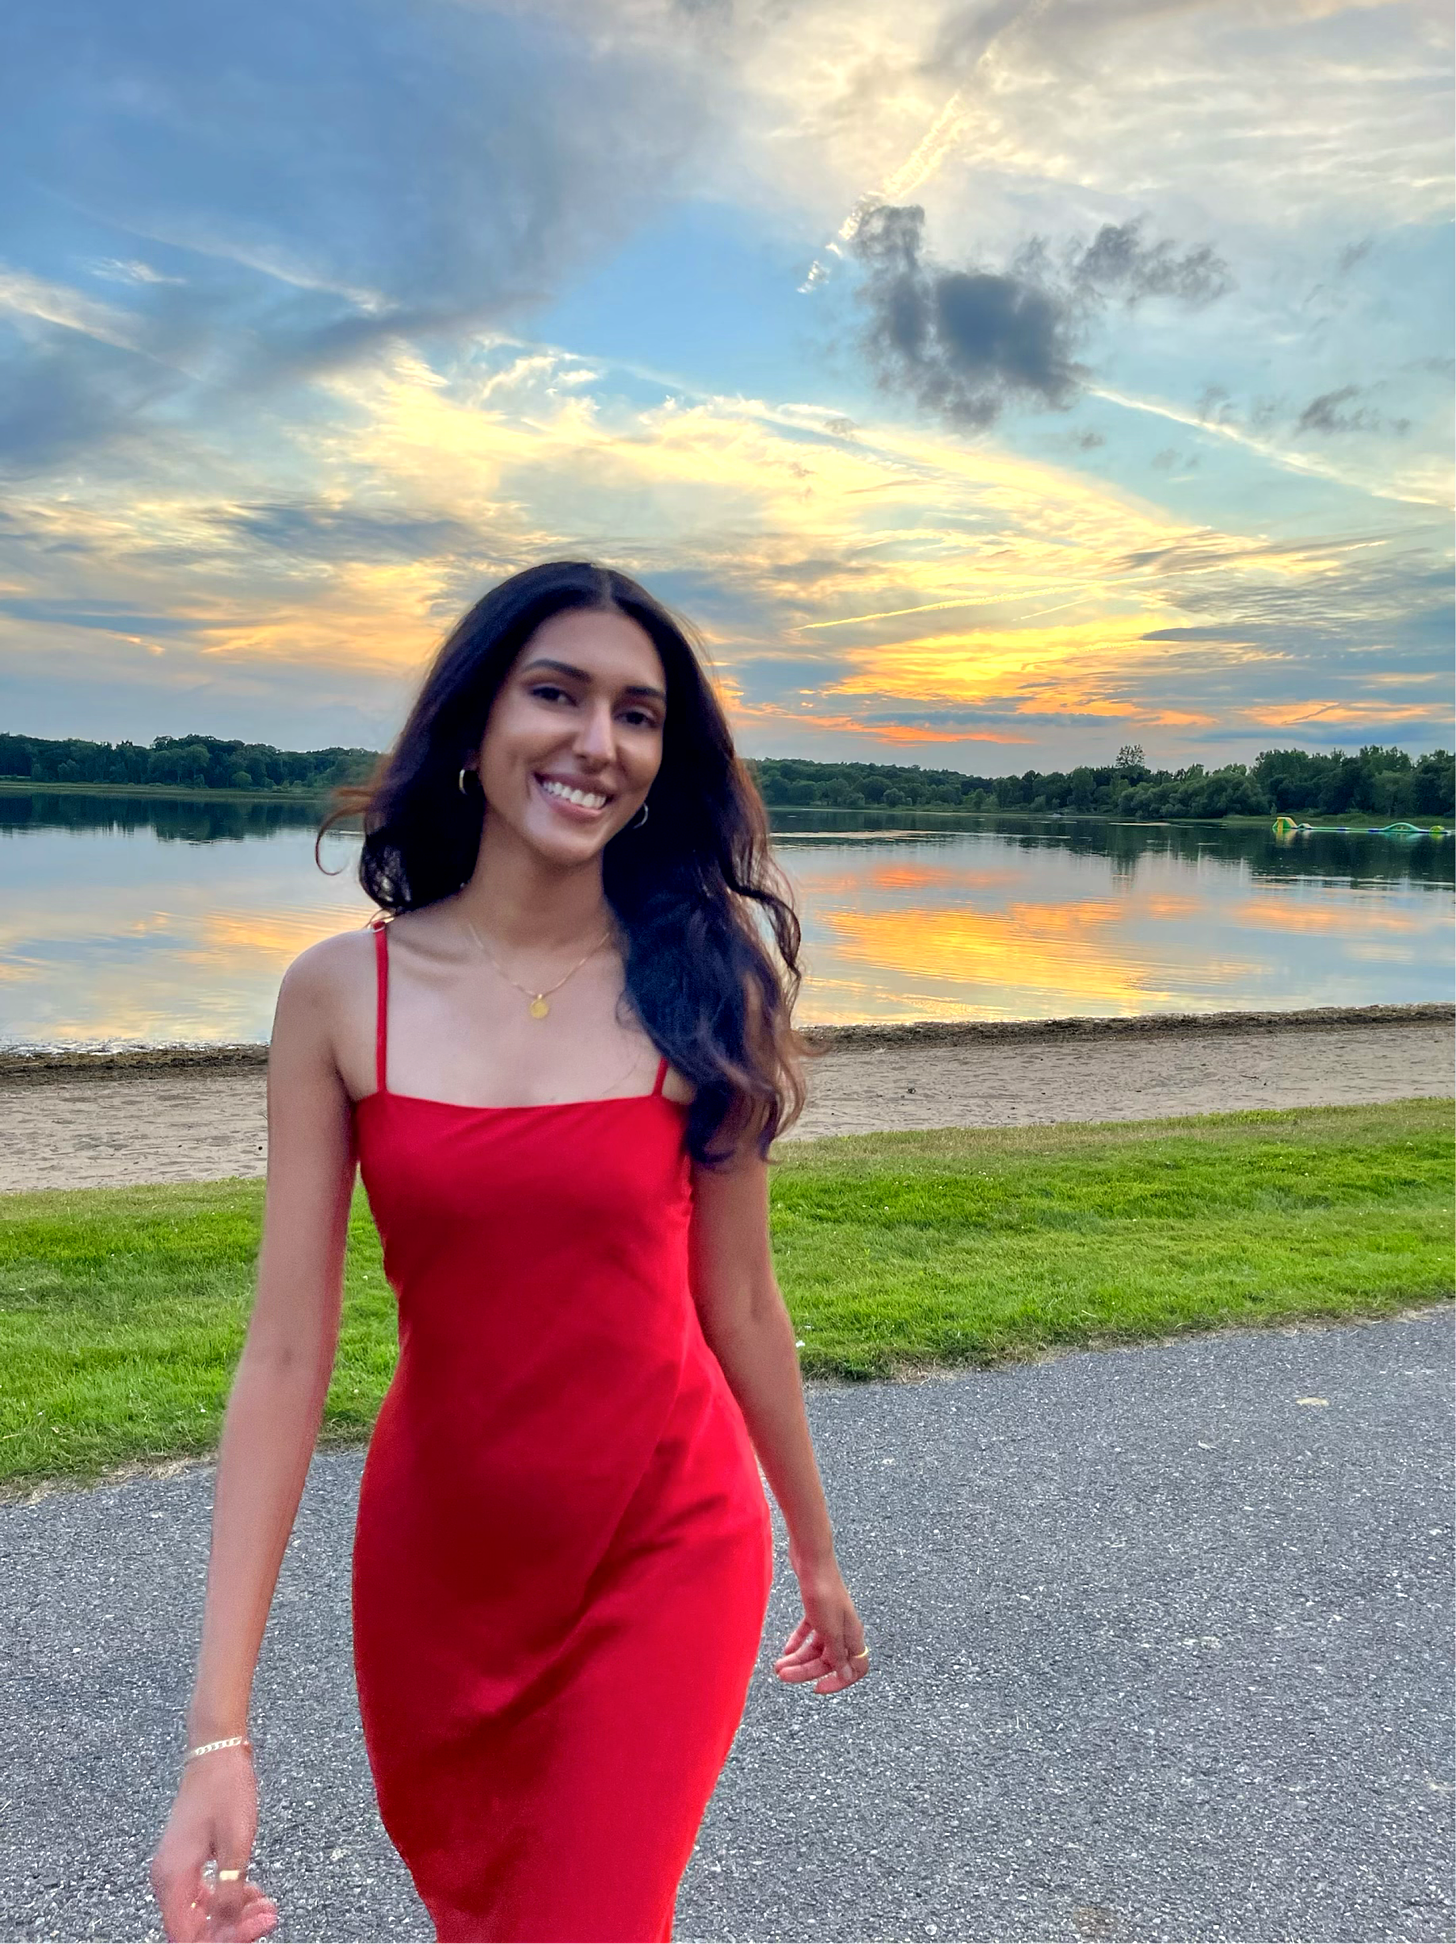 Abi in a red dress walking towards the camera smiling in front of a sunset, water, and some grass.